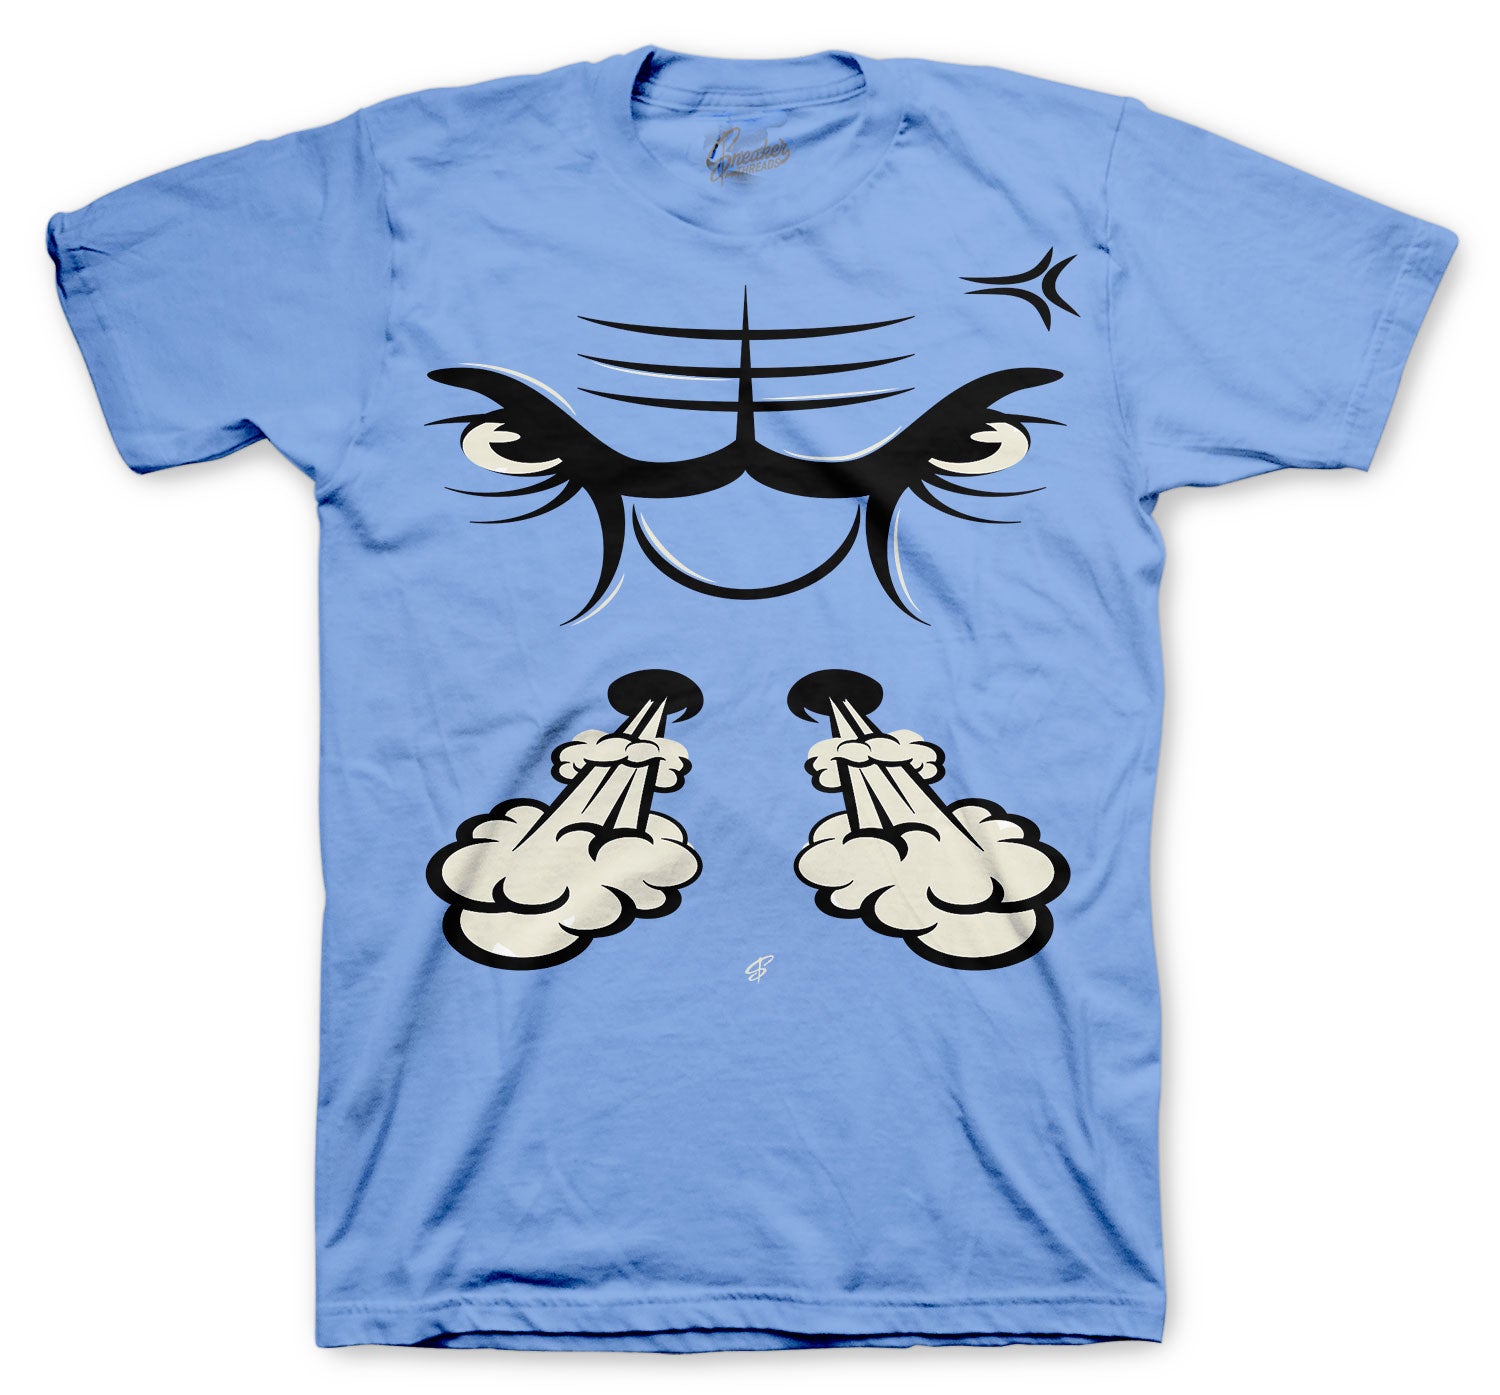 shirts for unc 3s